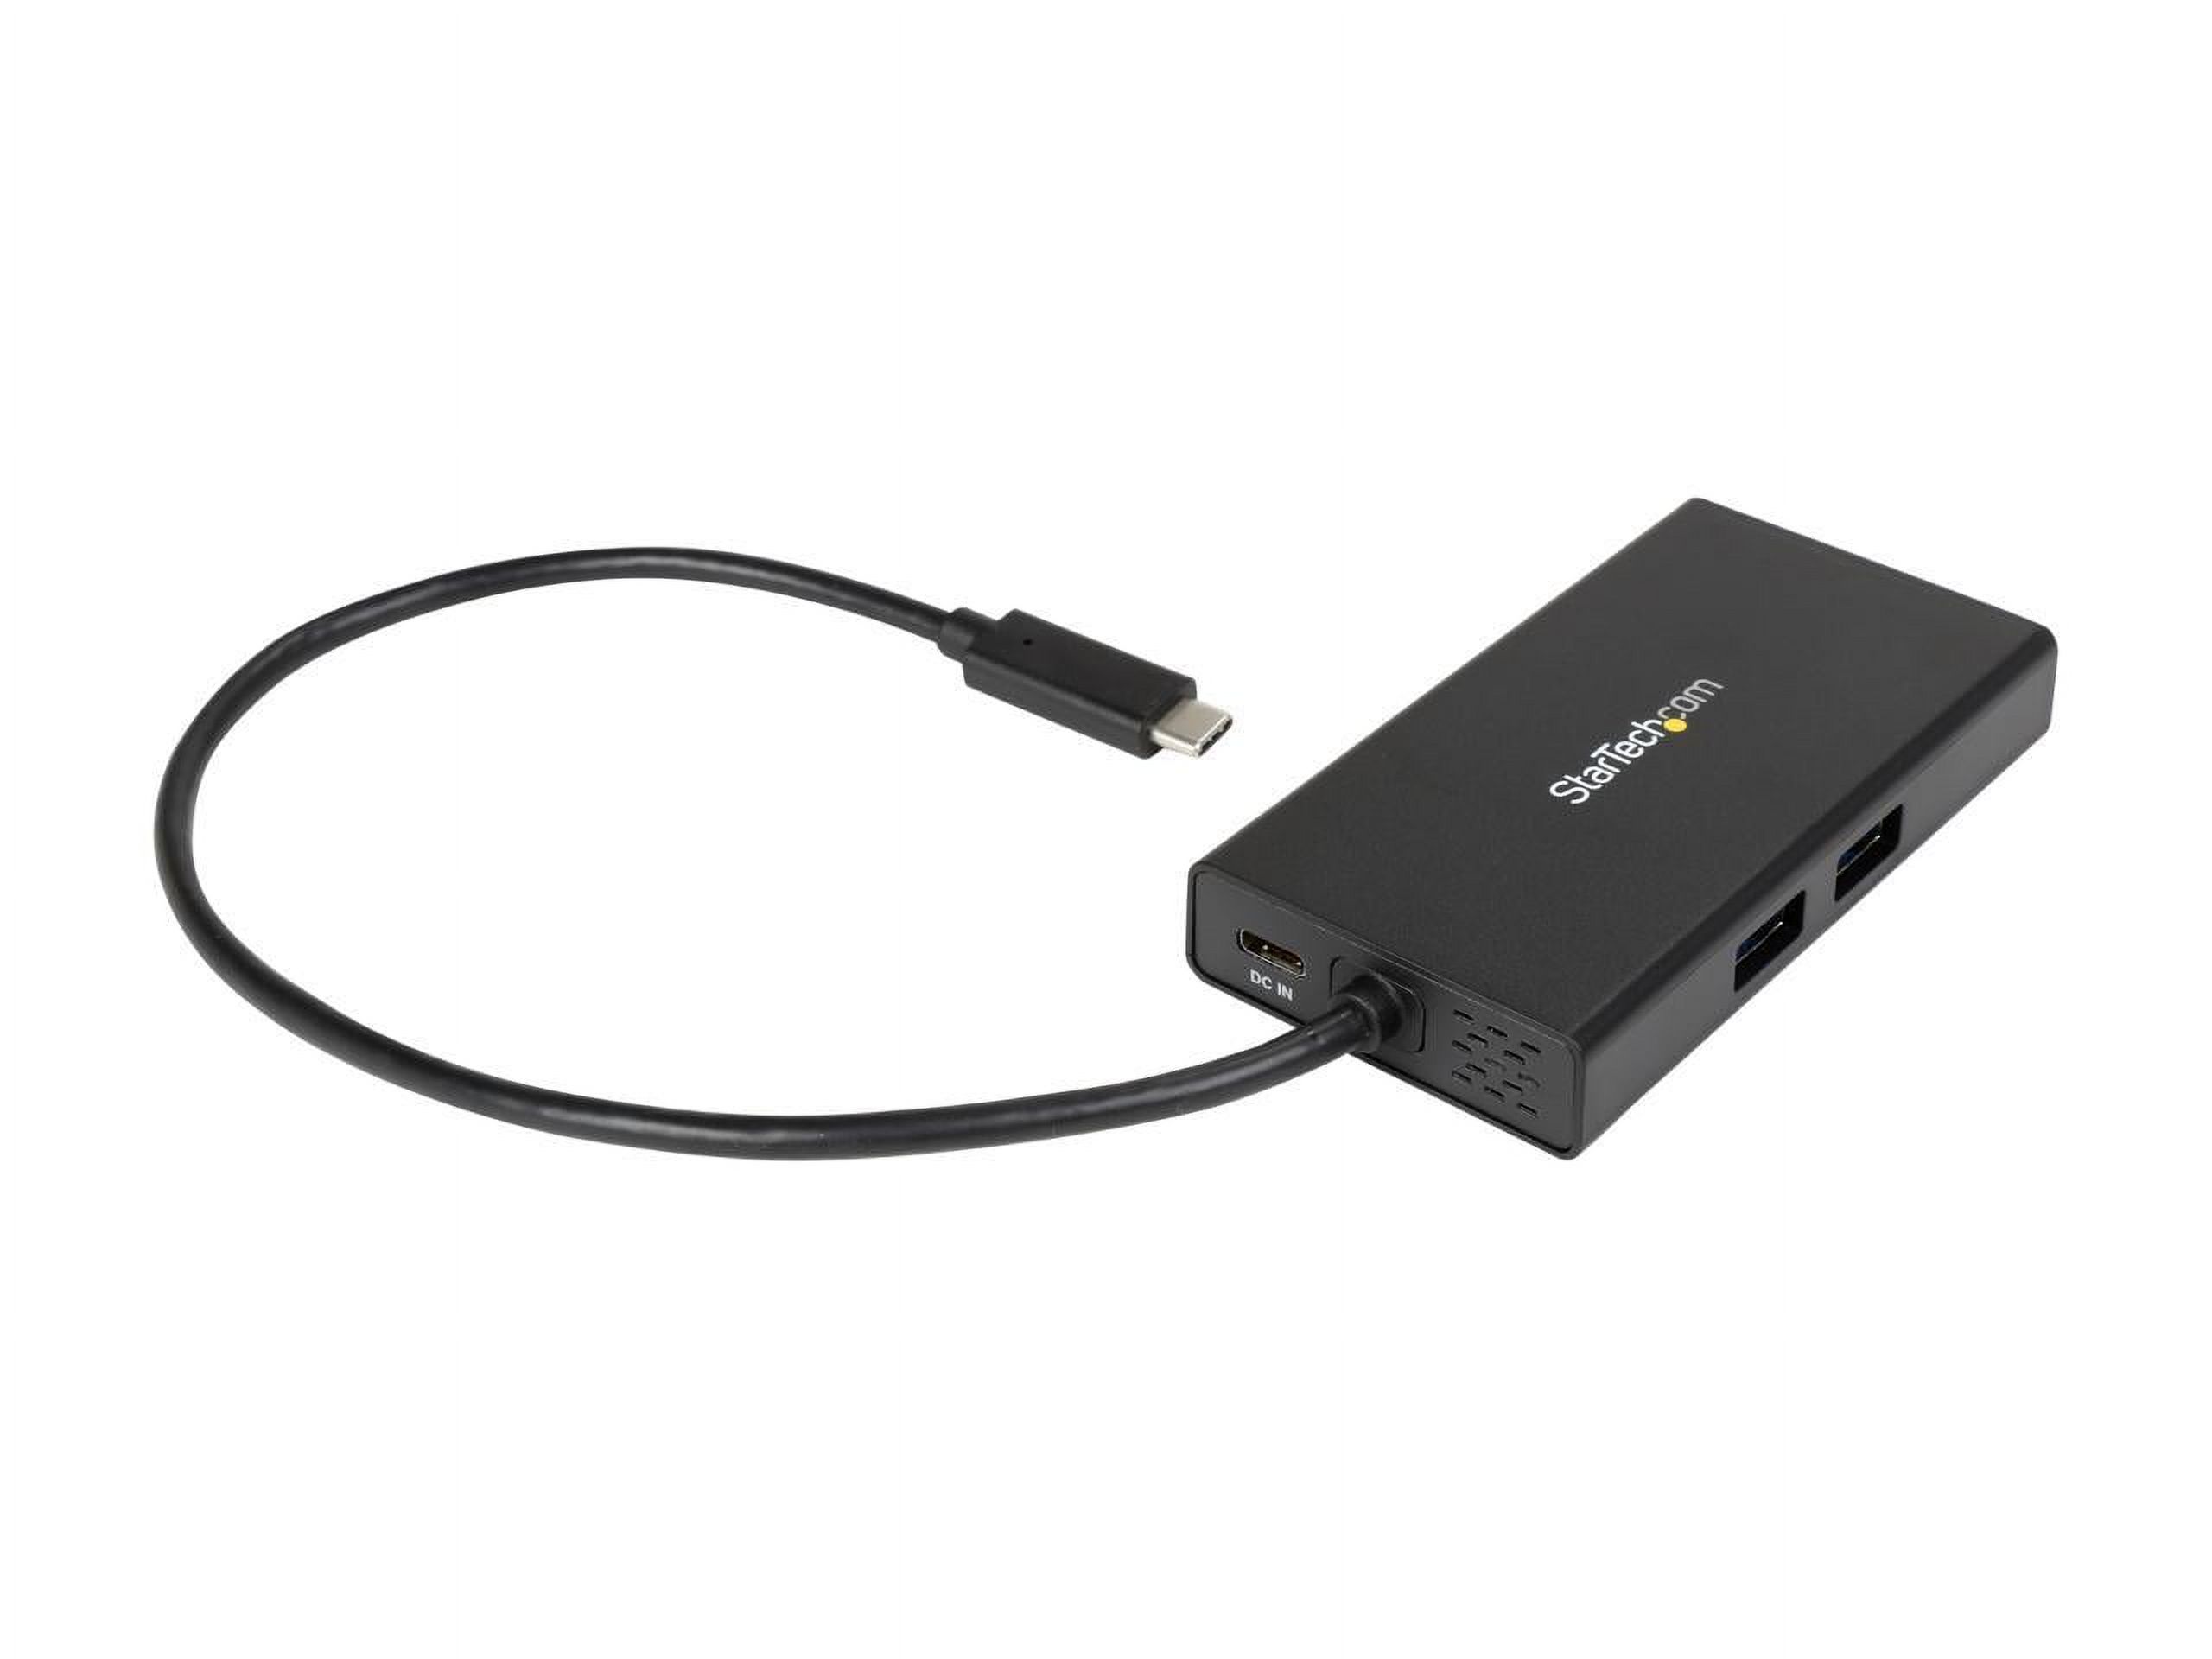 StarTech.com DKT30CHPD USB-C Multiport Adapter with 4K HDMI - 2x USB-A Ports - 60W PD - Black - image 2 of 3